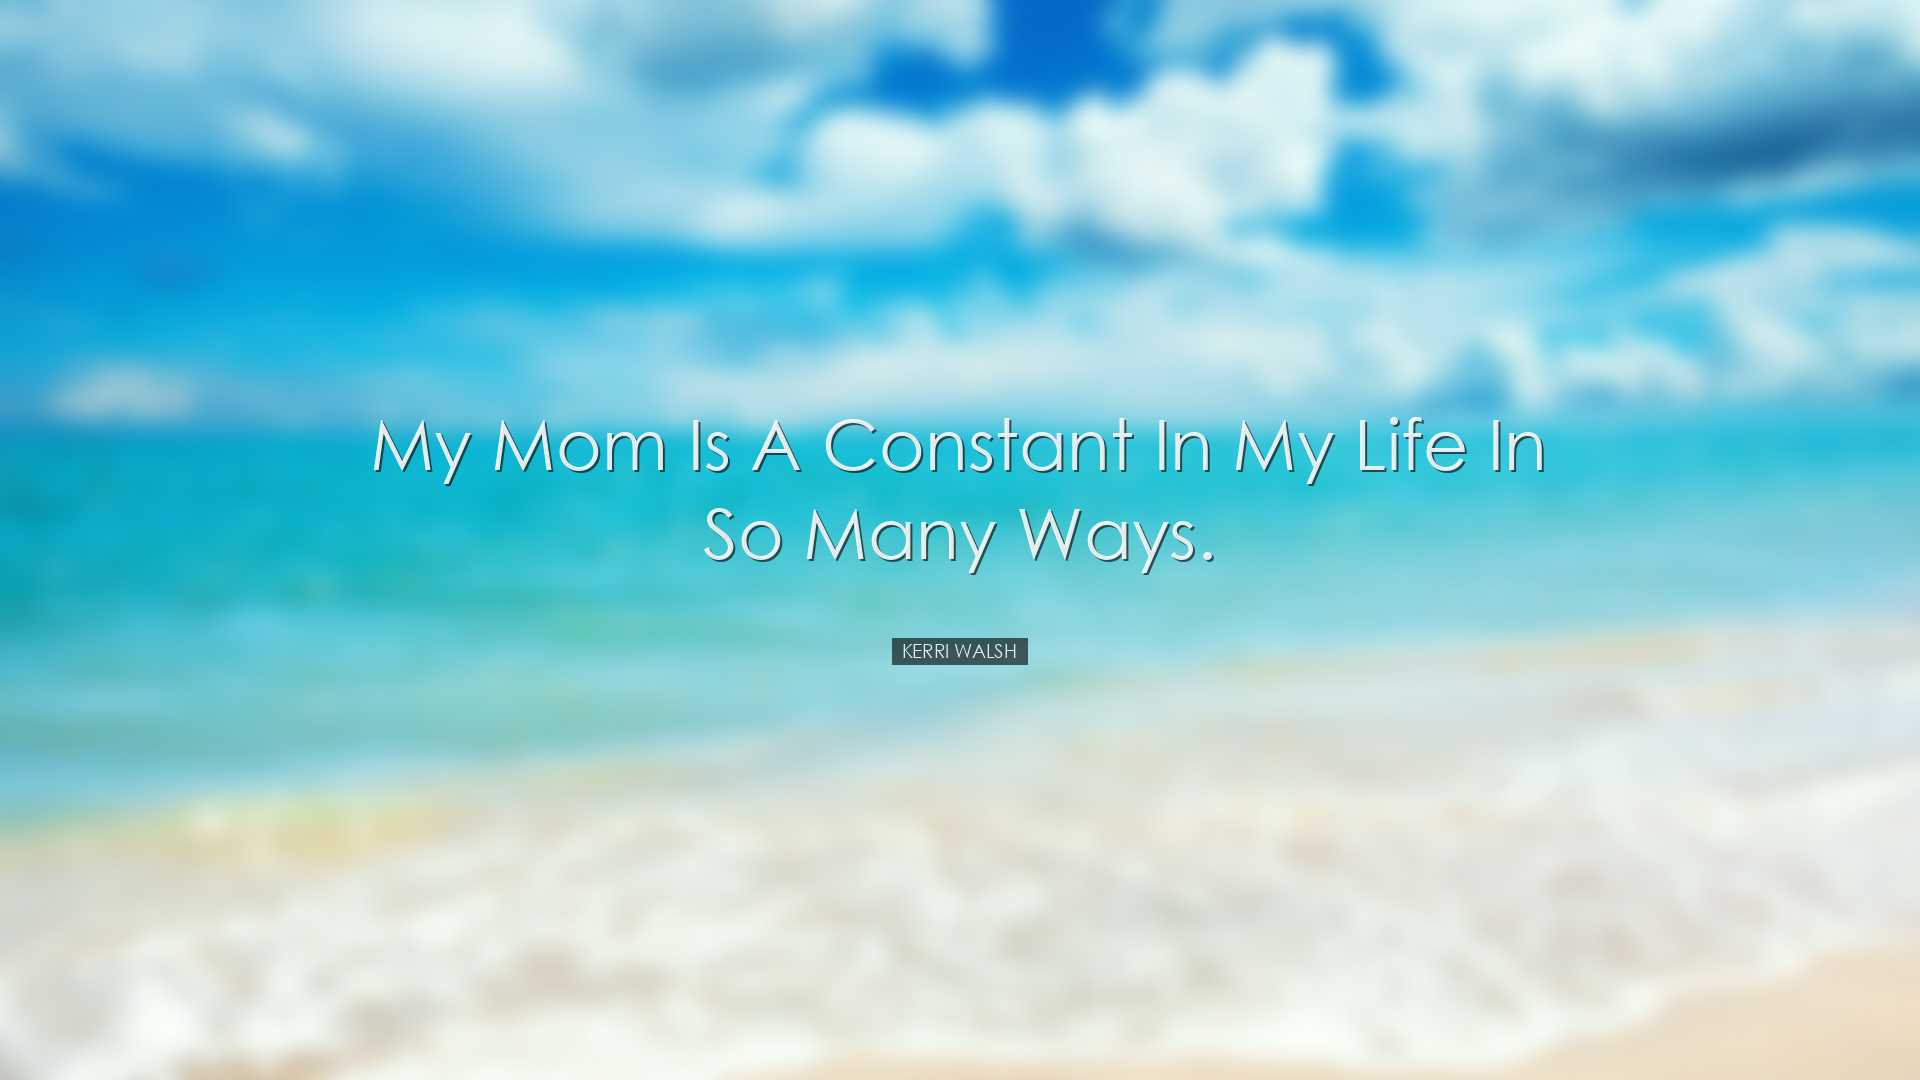 My mom is a constant in my life in so many ways. - Kerri Walsh